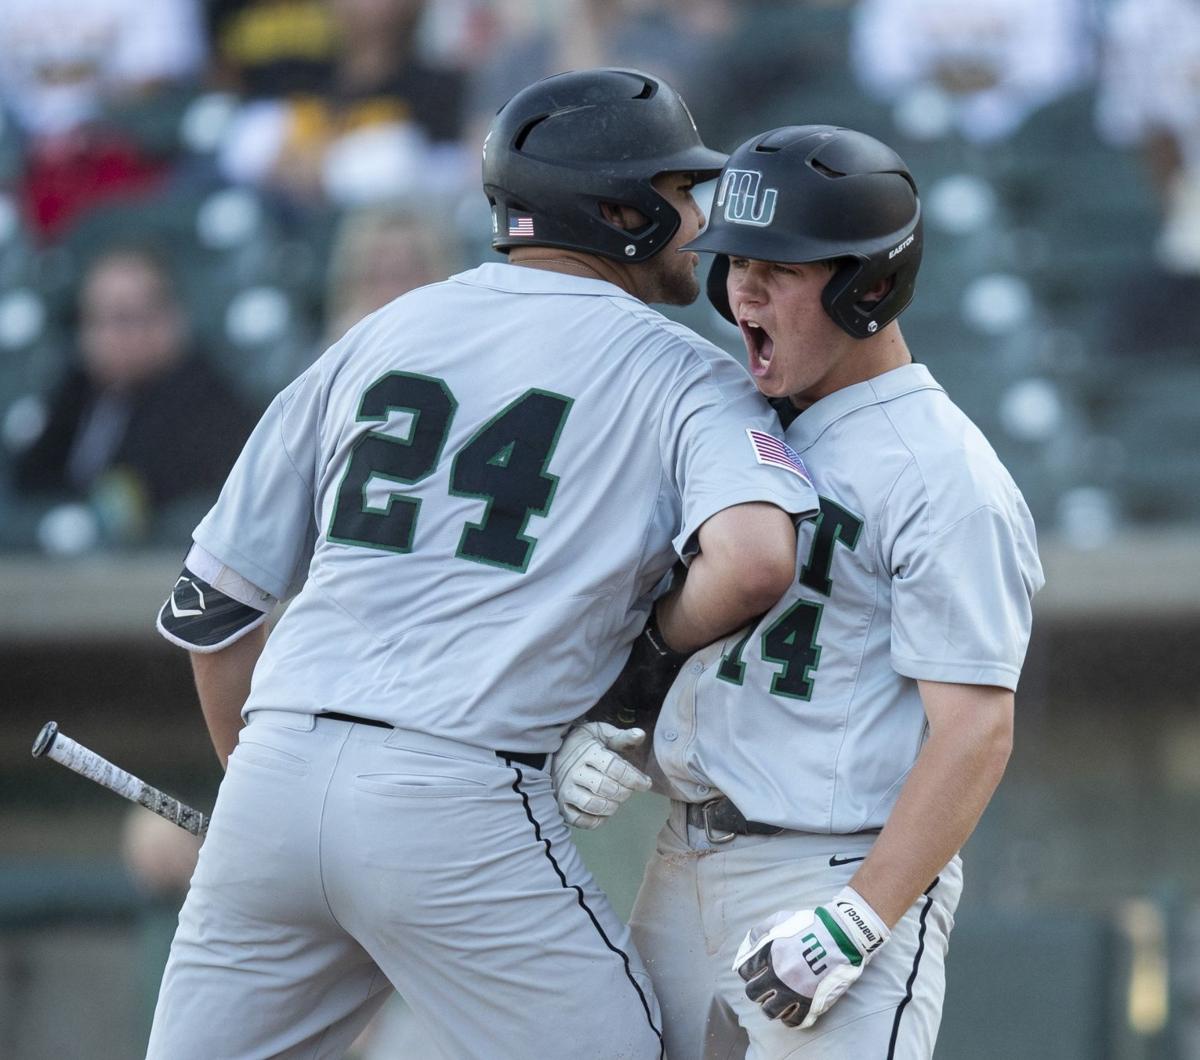 Millard West's Max Anderson perched at the top of a baseball season that  never happened